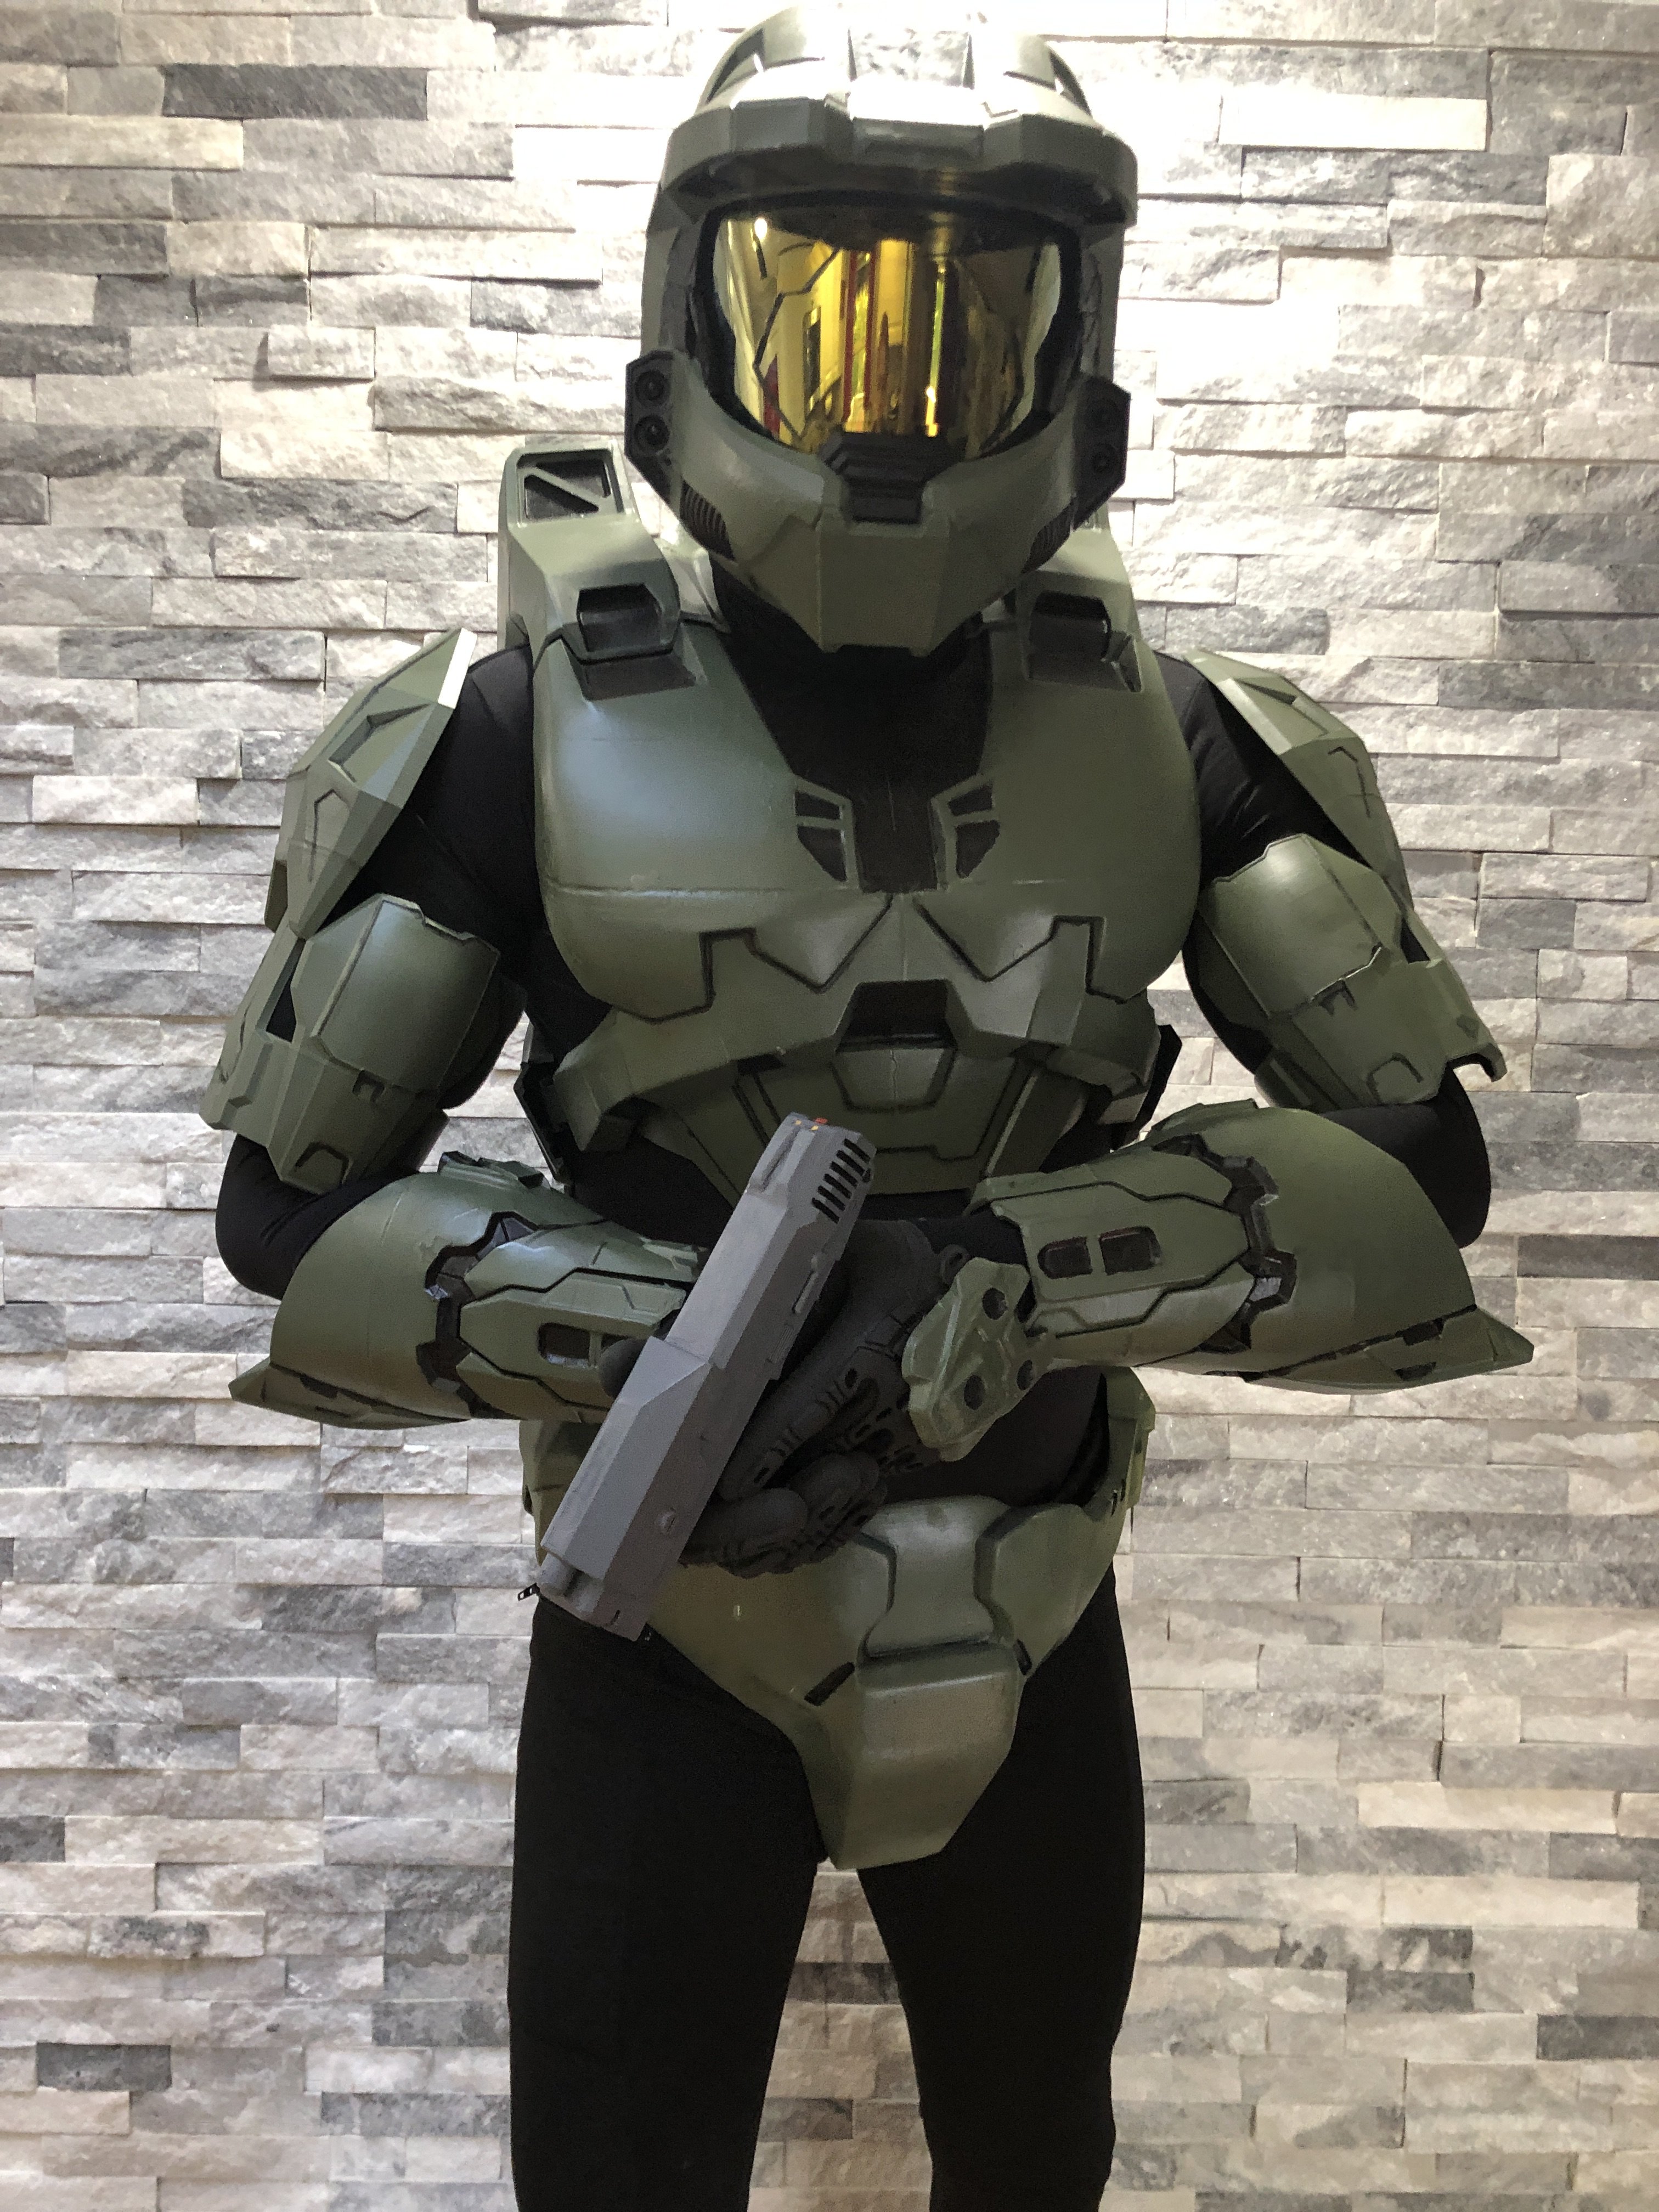 My First Build Halo 3 Master Chief Page 4 Halo Costume And Prop